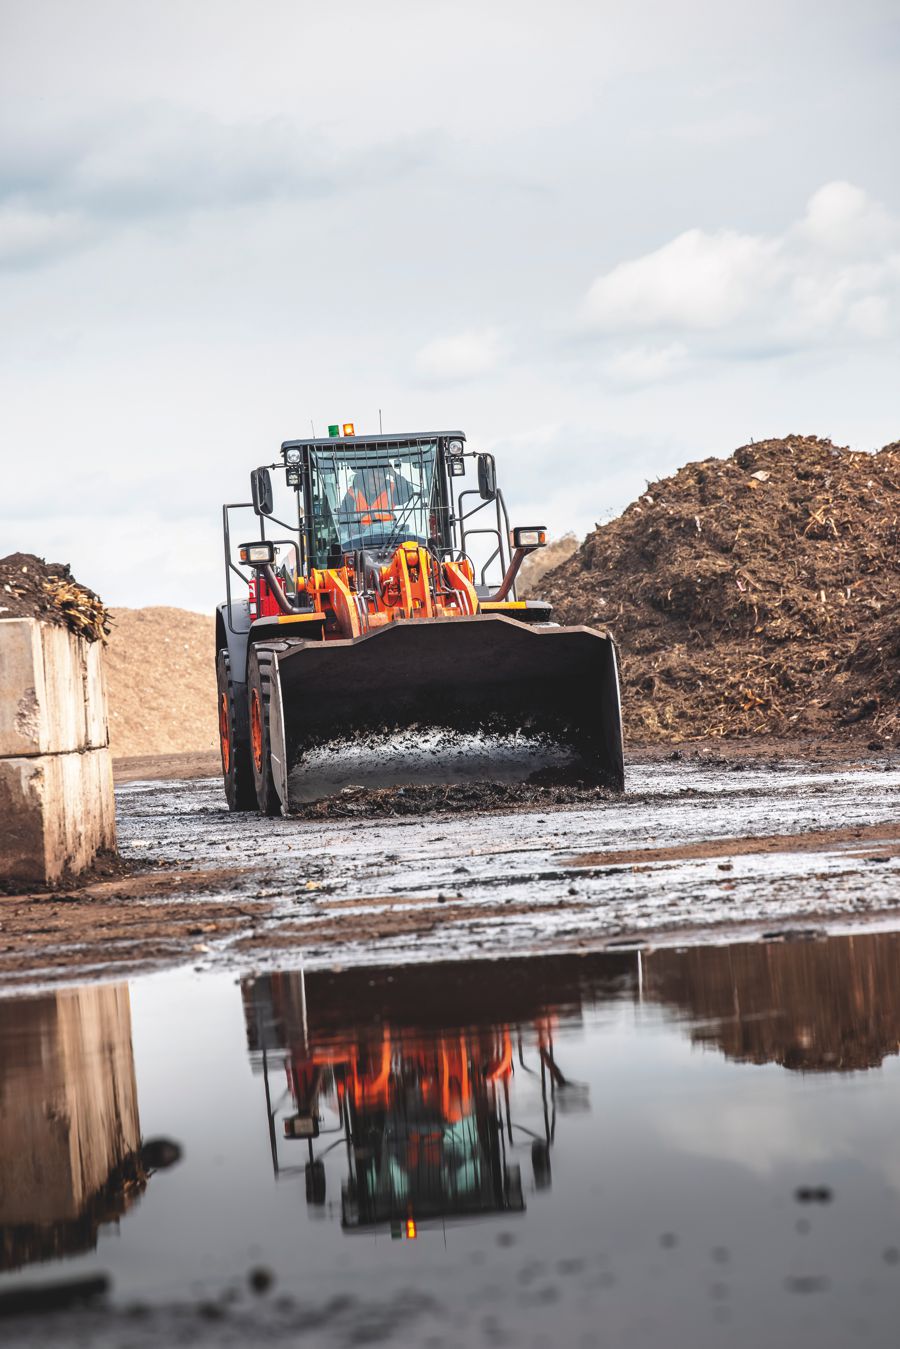 Service and quality puts Hitachi Wheel Loaders in first place for Recycling company